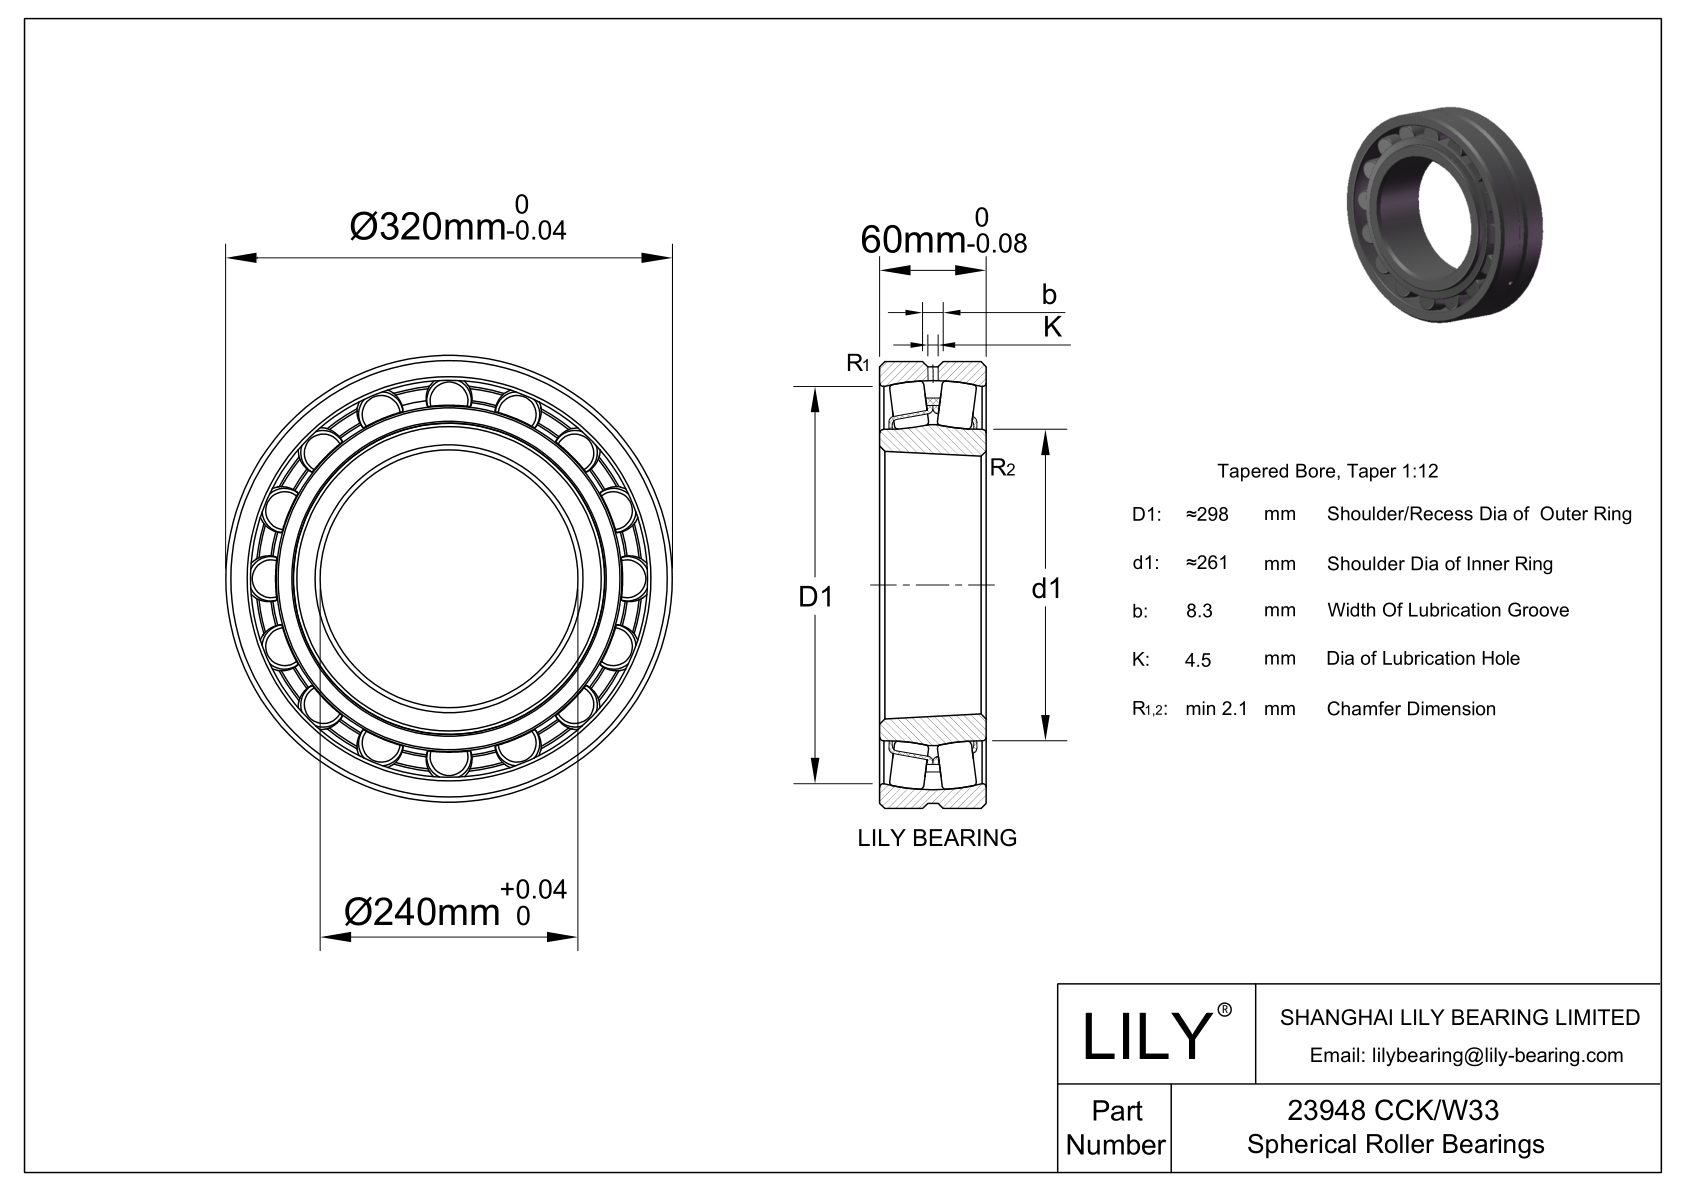 23948 CCK/W33 Double Row Spherical Roller Bearing cad drawing